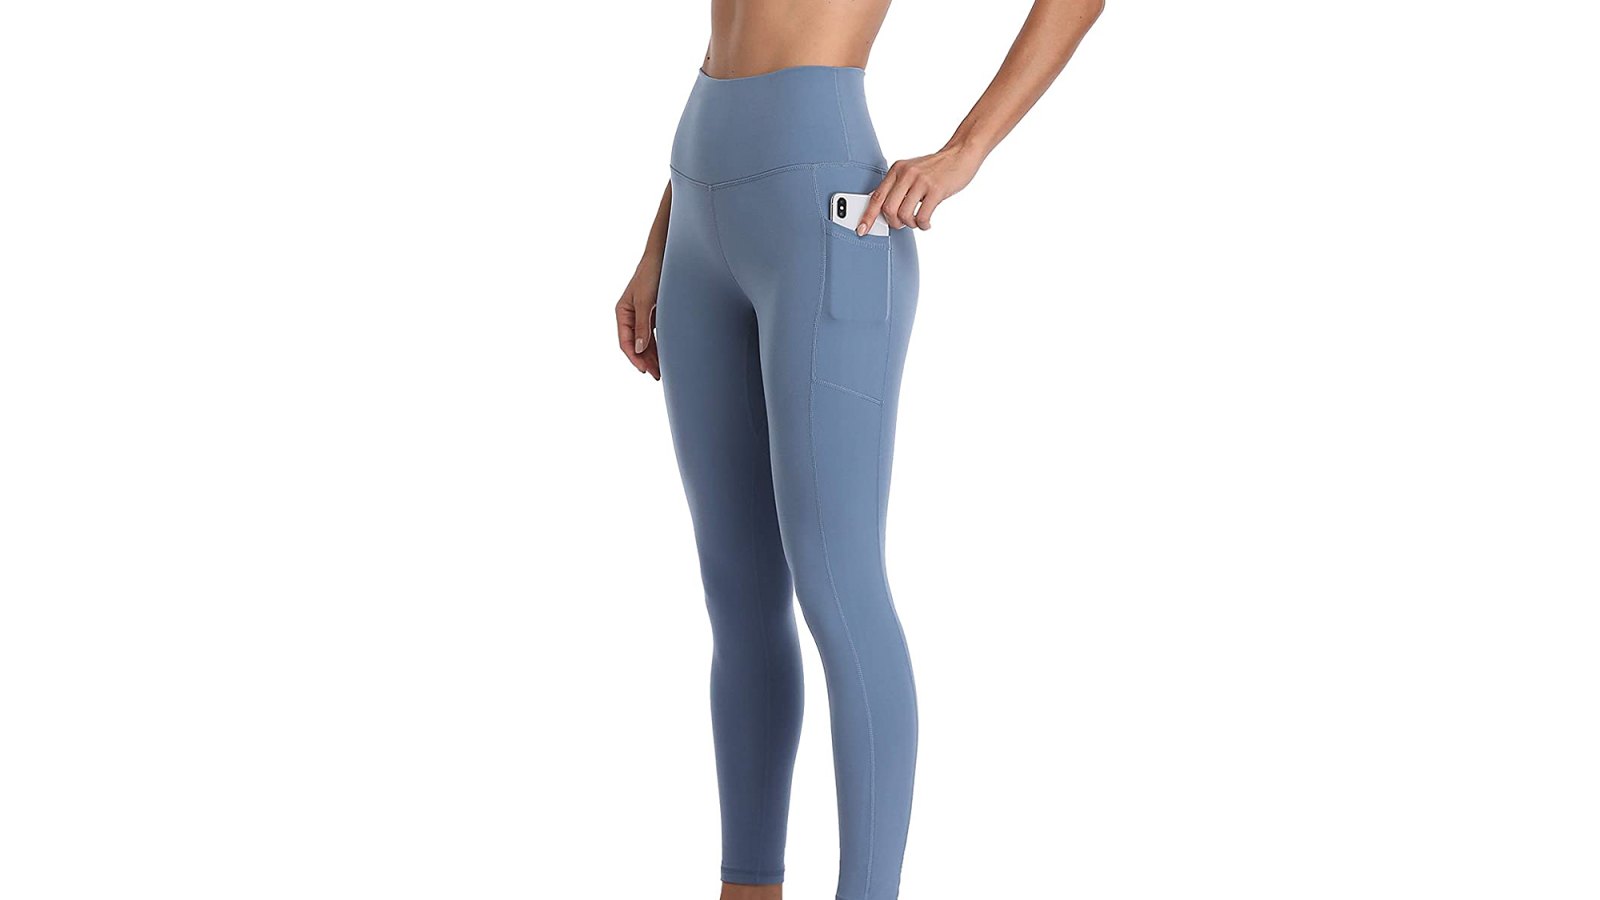 https://www.usmagazine.com/wp-content/uploads/2022/02/Colorfulkoala-Womens-High-Waisted-78-Length-Leggings-with-Pockets.jpg?crop=0px%2C0px%2C2000px%2C1131px&resize=1600%2C900&quality=86&strip=all